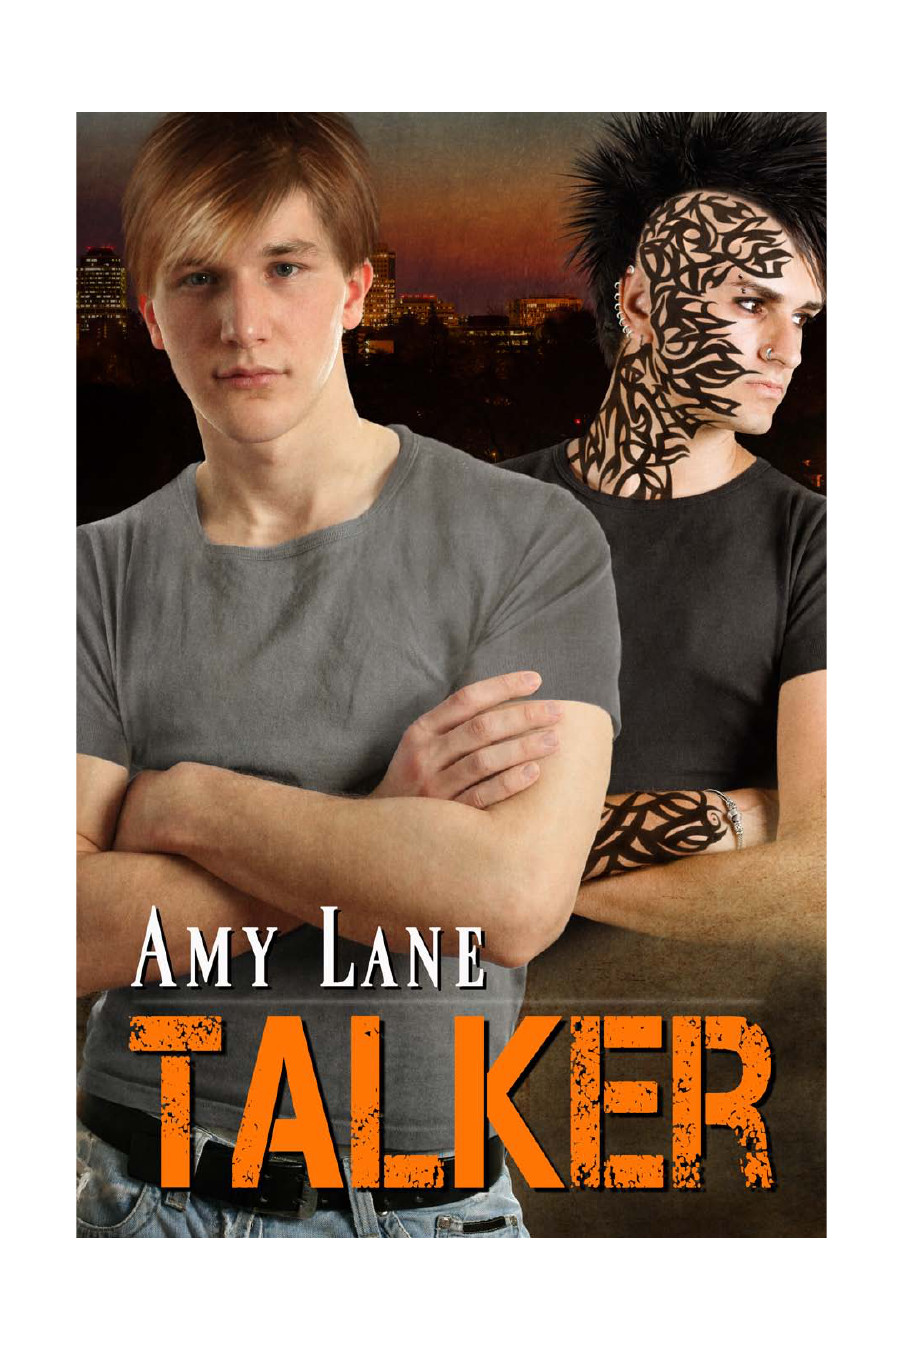 The Talker Collection by Amy Lane